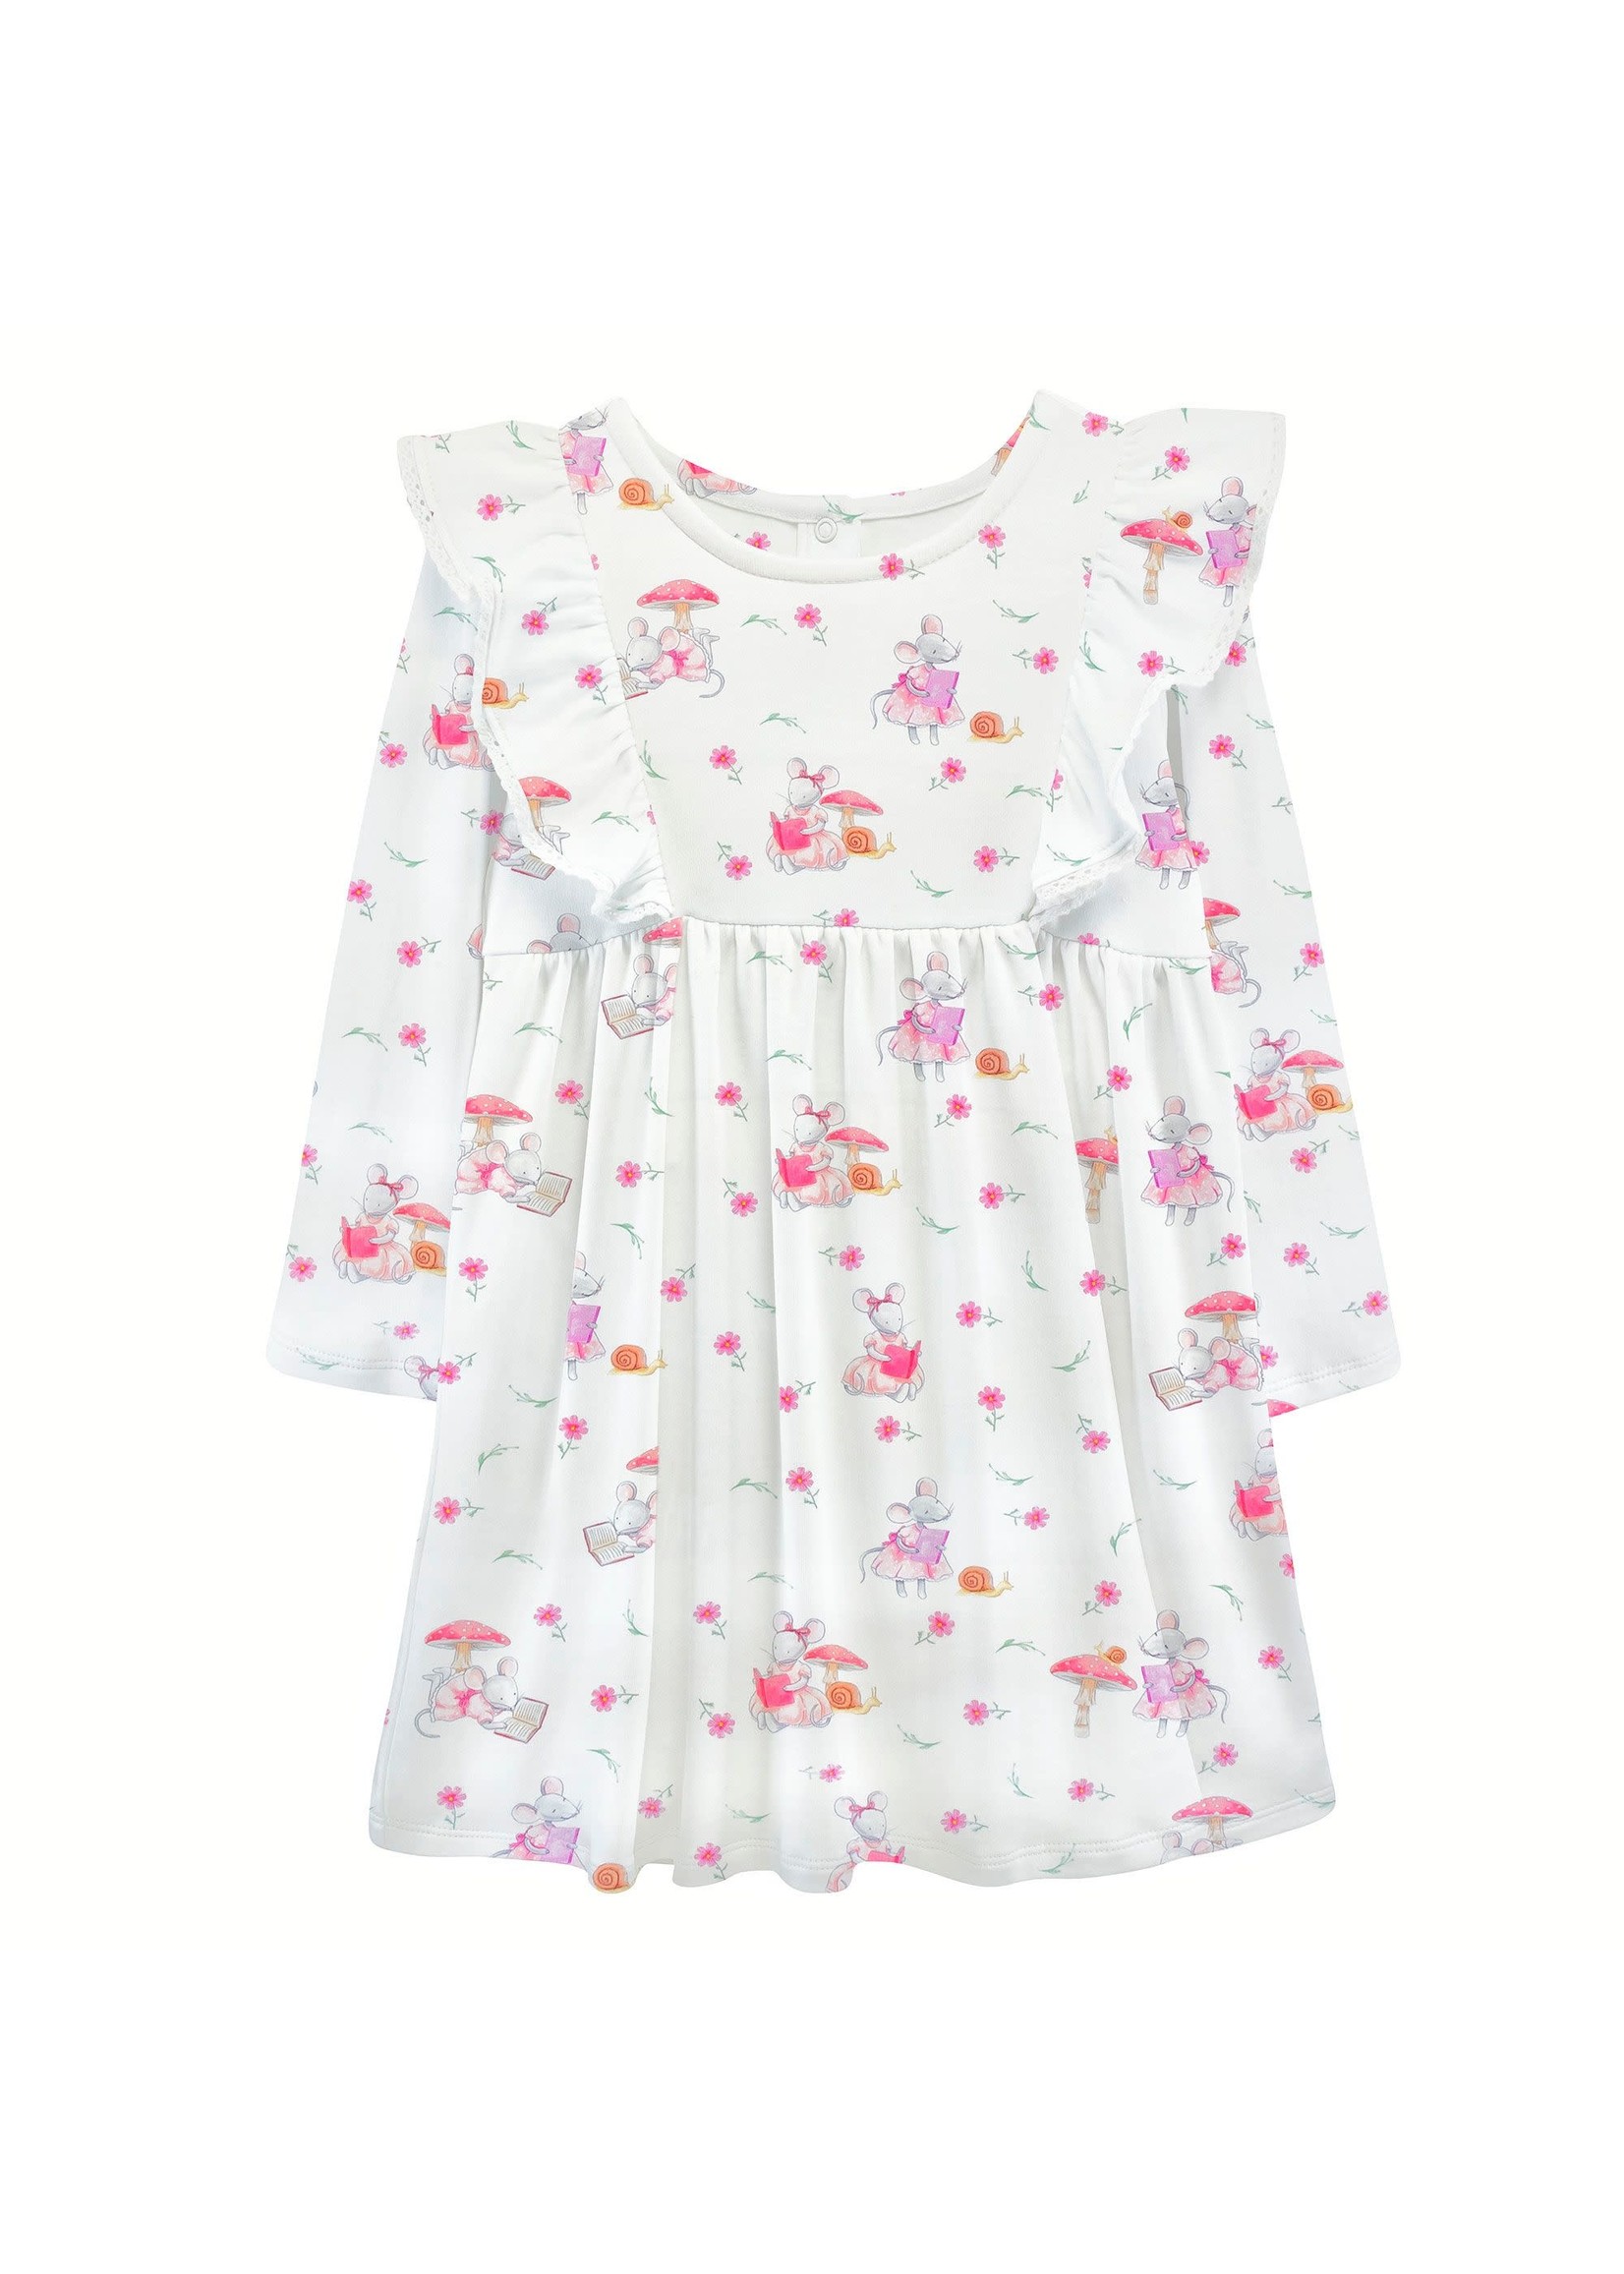 Baby Club Chic Reader Mousies Toddler Dress w/ Ruffle